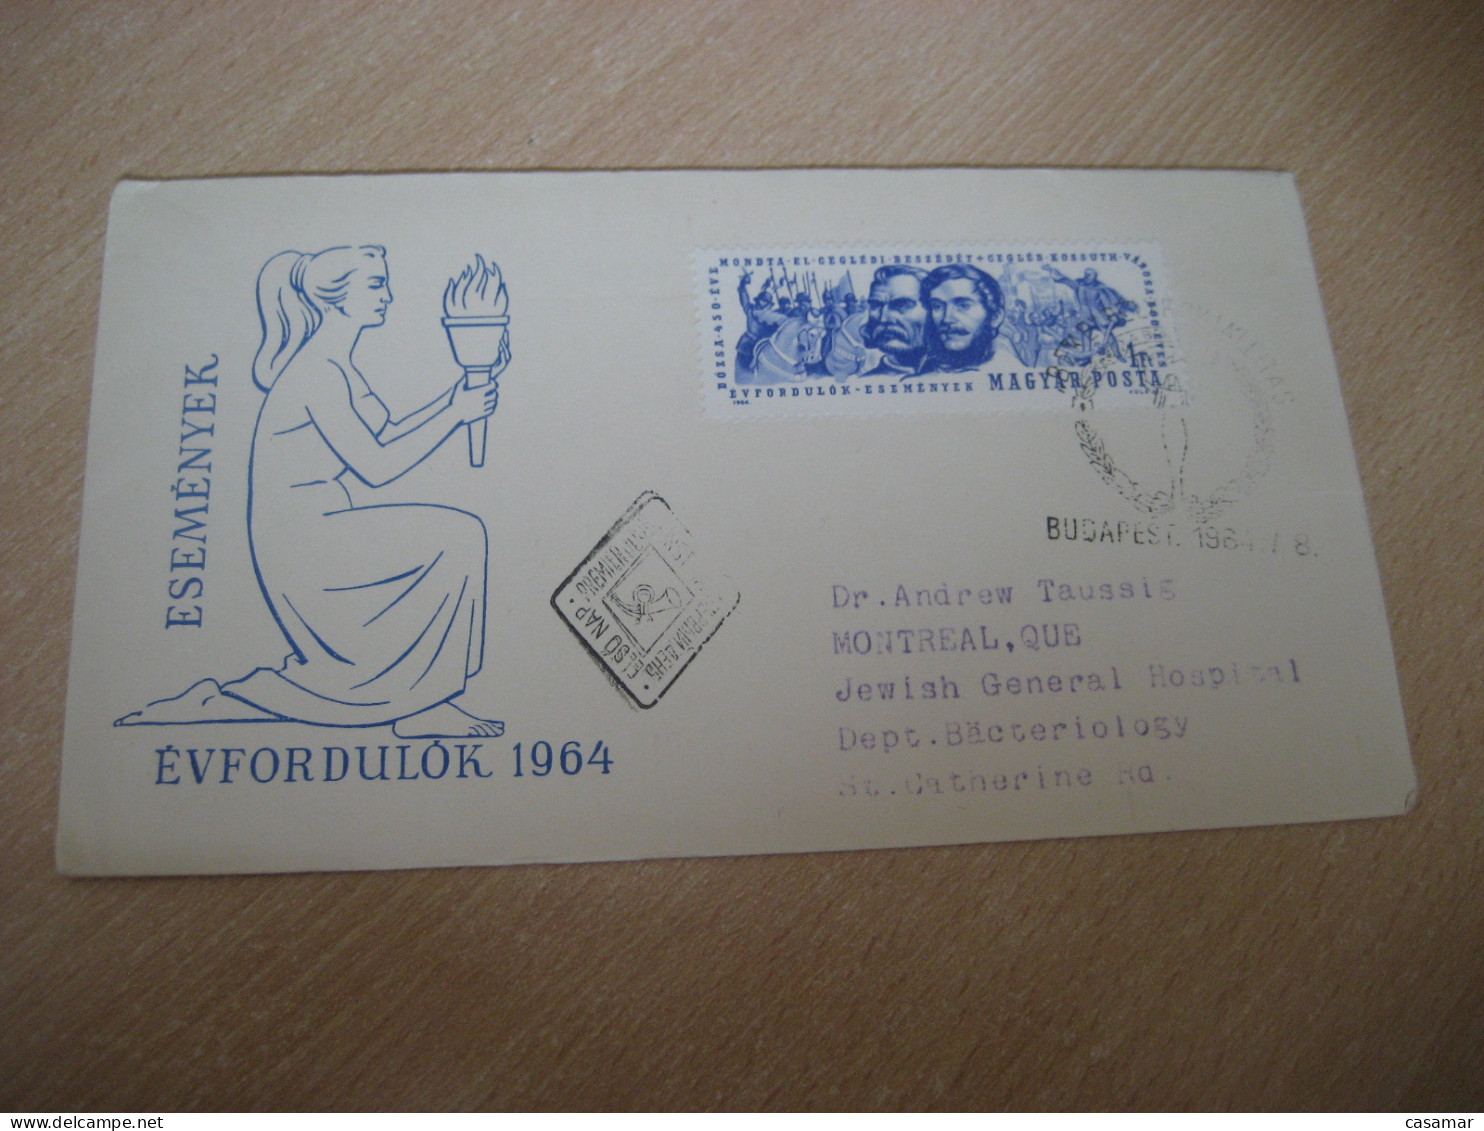 BUDAPEST 1964 To Montreal Canada CEGLED Yv 1642 FDC Cancel Cover HUNGARY - Covers & Documents